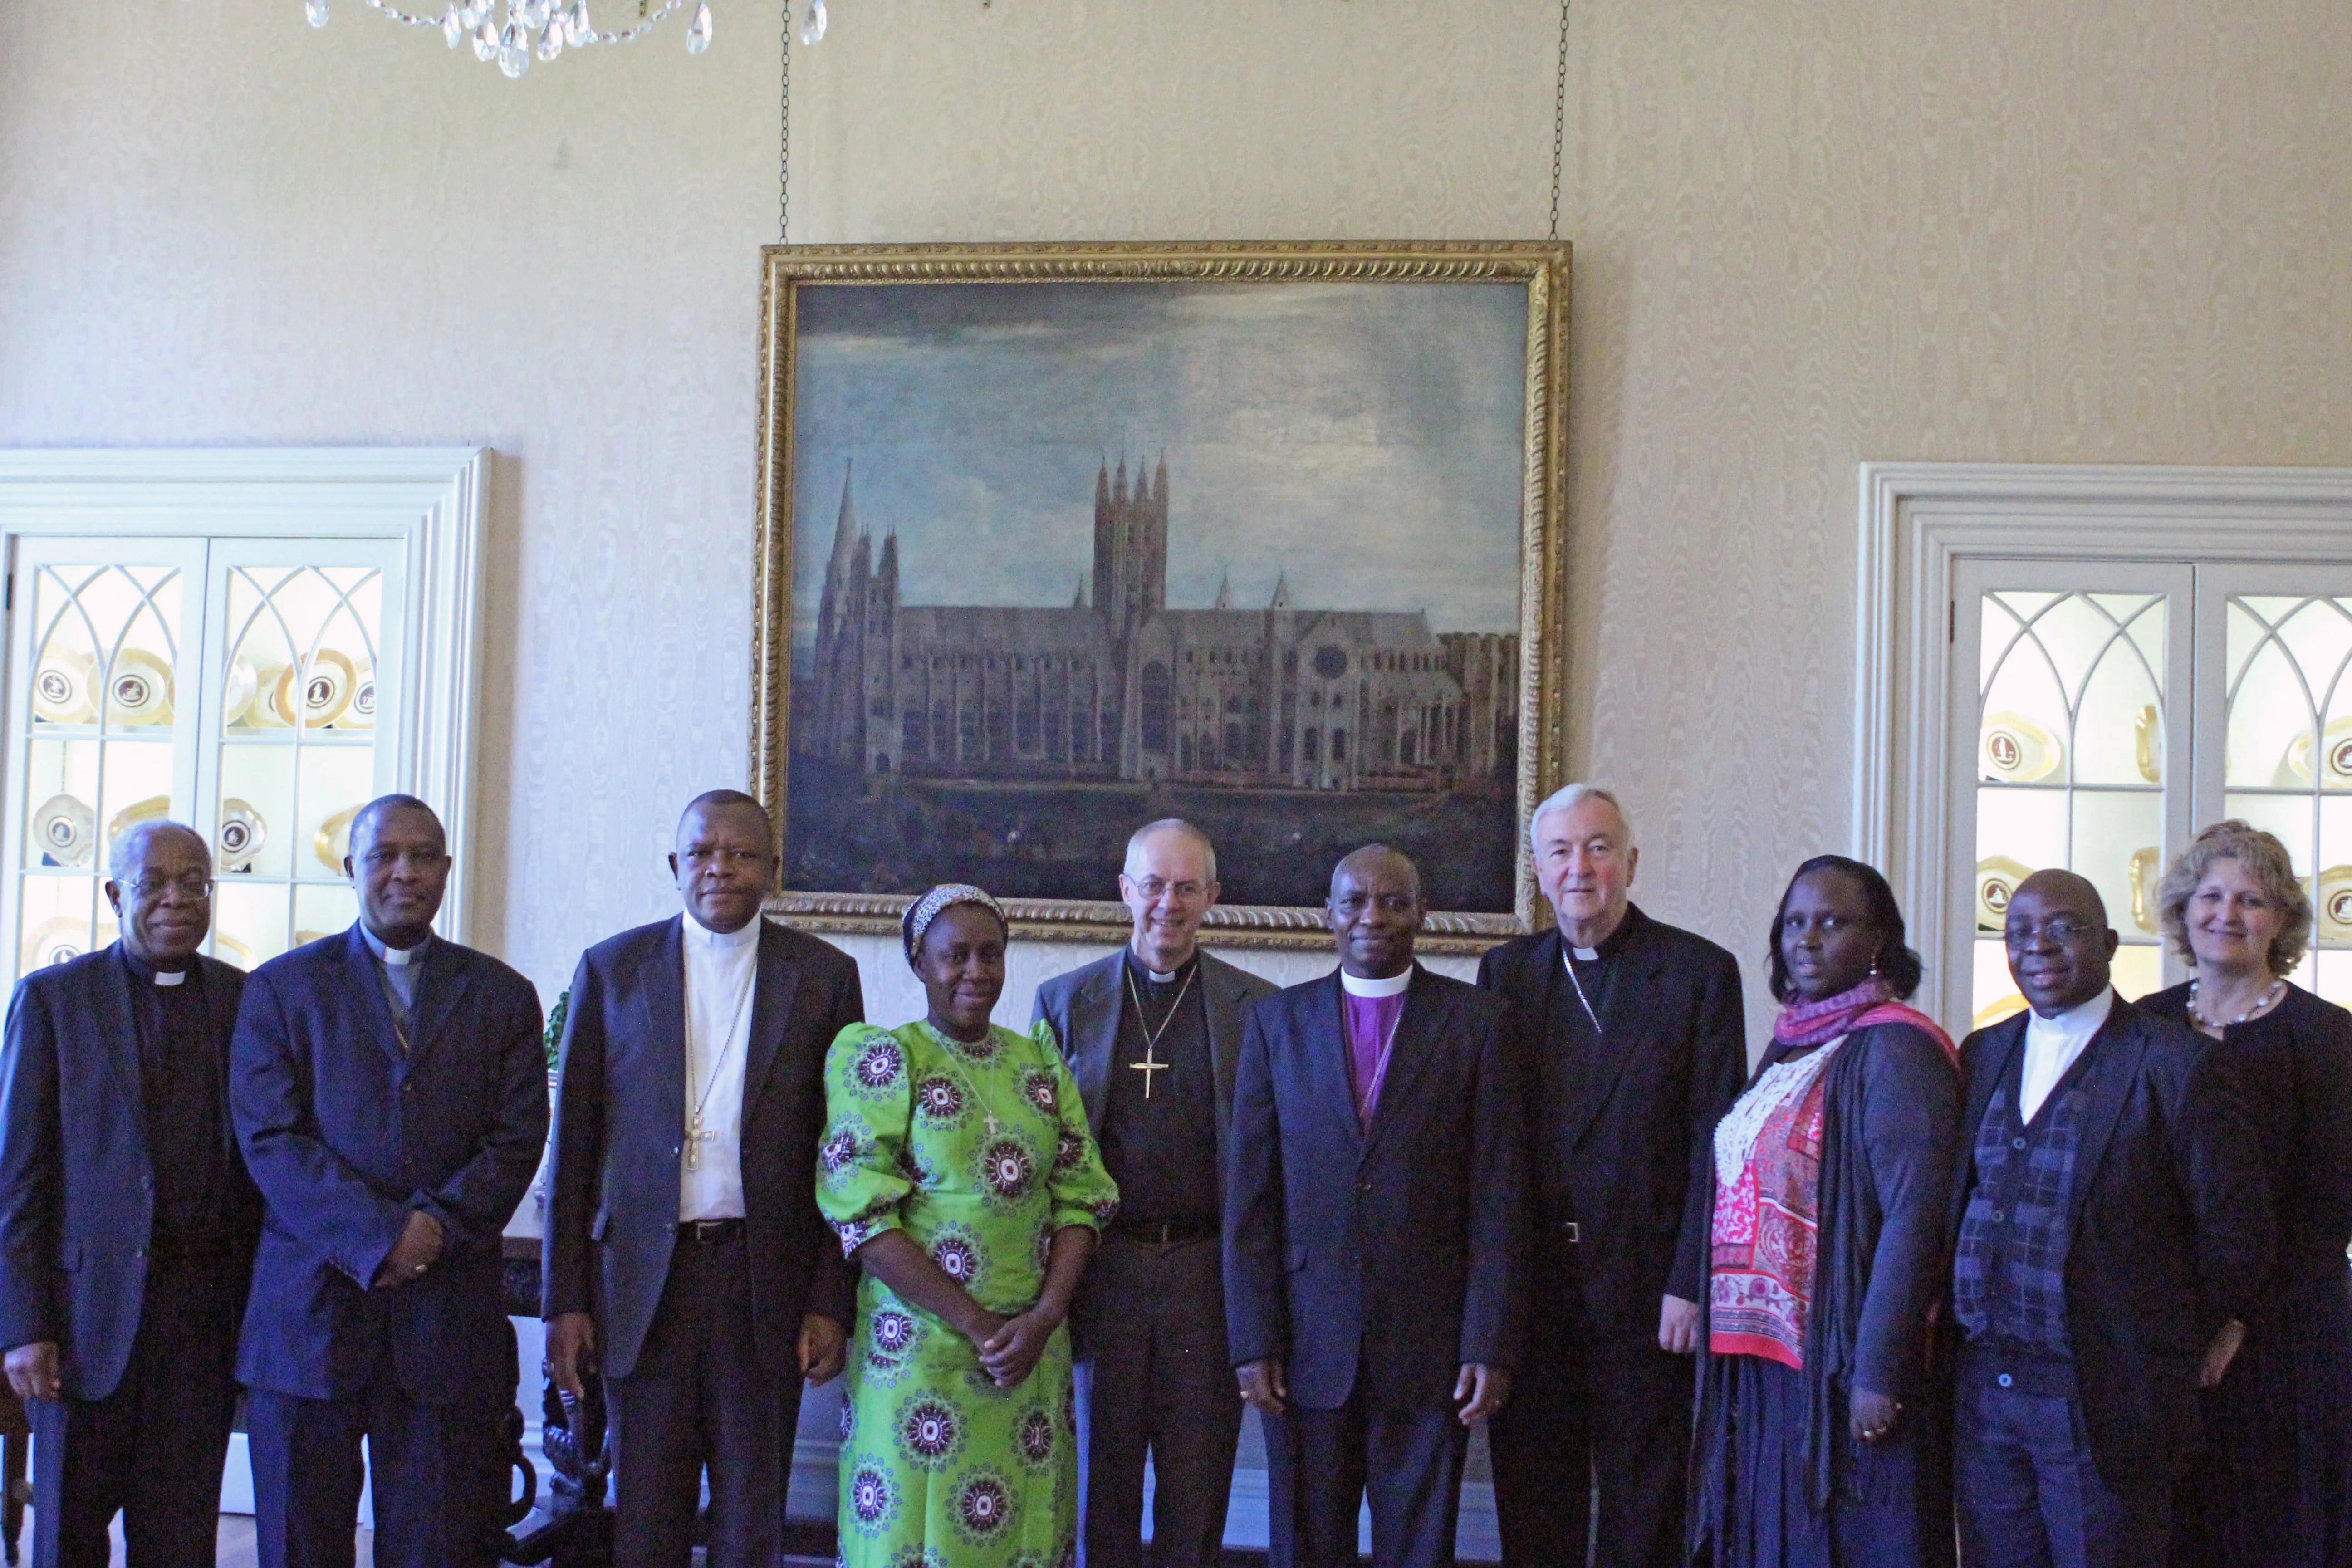 Archbishop of Canterbury Justin Welby and Cardinal Vincent Nichols of Westminster met with Anglican and Roman Catholic leaders from the Democratic Republic of Congo, Burundi, and Rwanda at Lambeth Palace